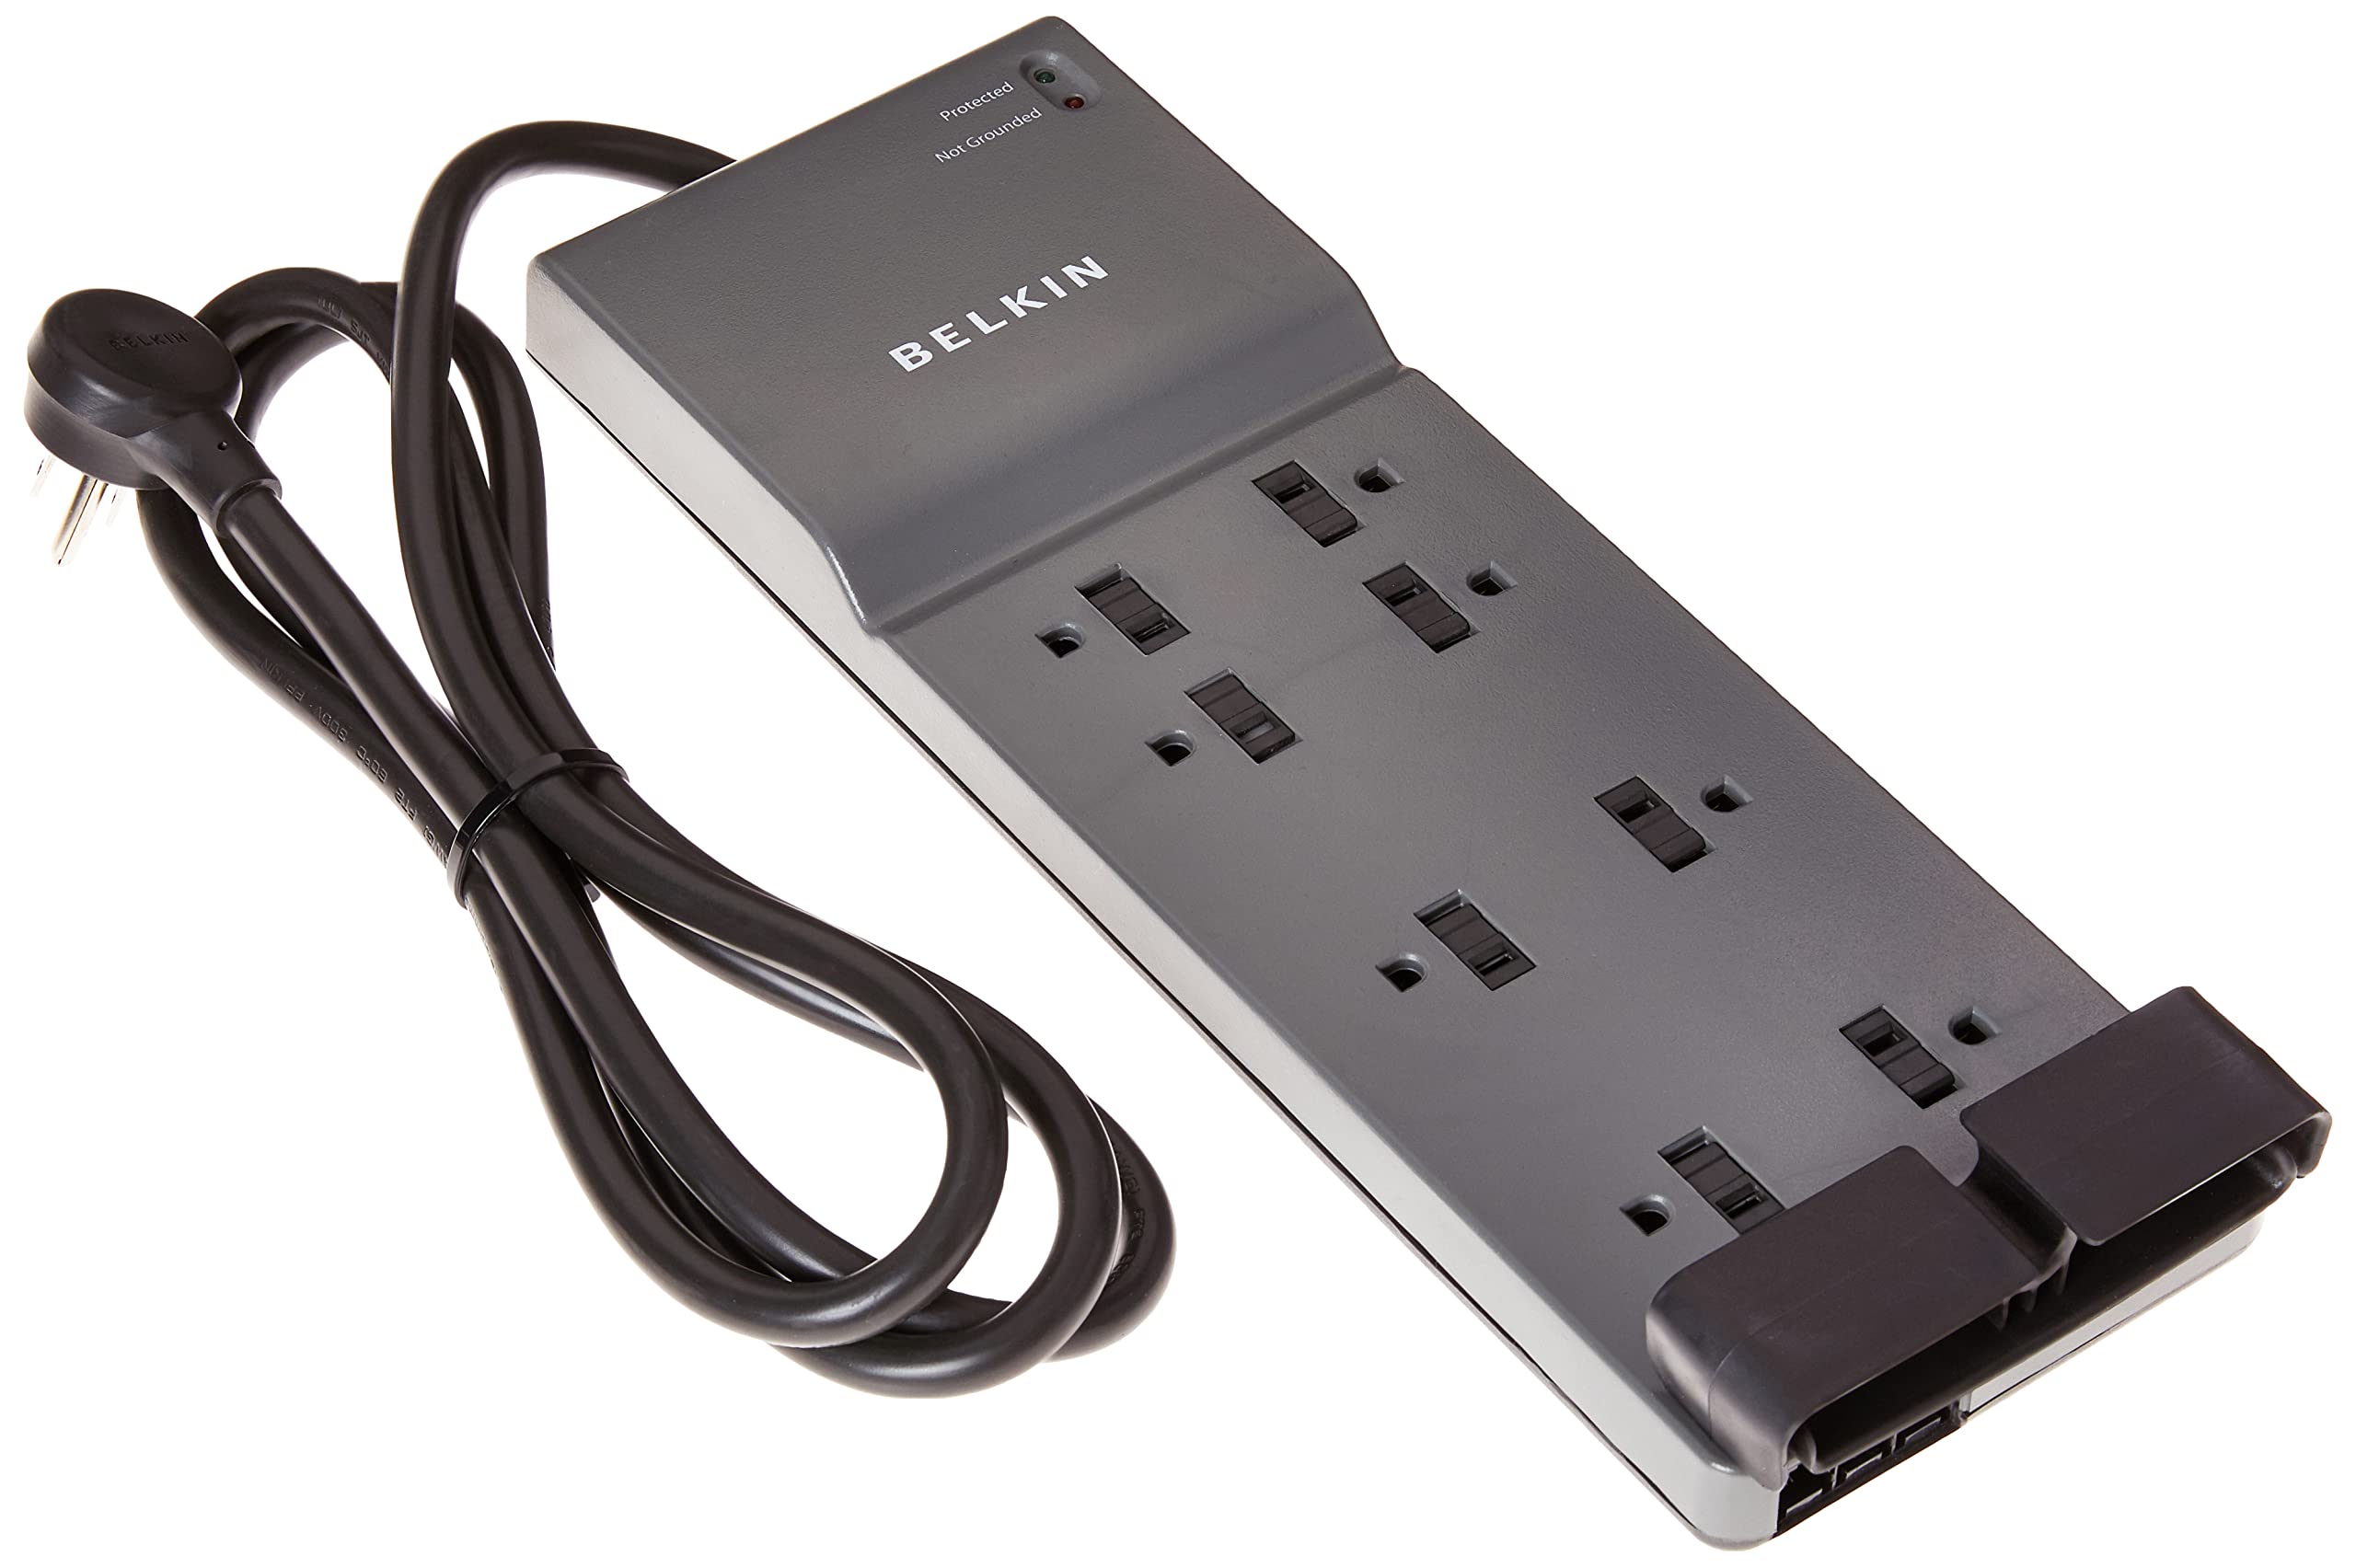 Belkin 8-Outlet Power Strip Surge Protector w/Flat Plug, 6ft Cord – Ideal for Computers, Home Theatre, Appliances, Office Equipment (3,550 Joules) - 3 Pack